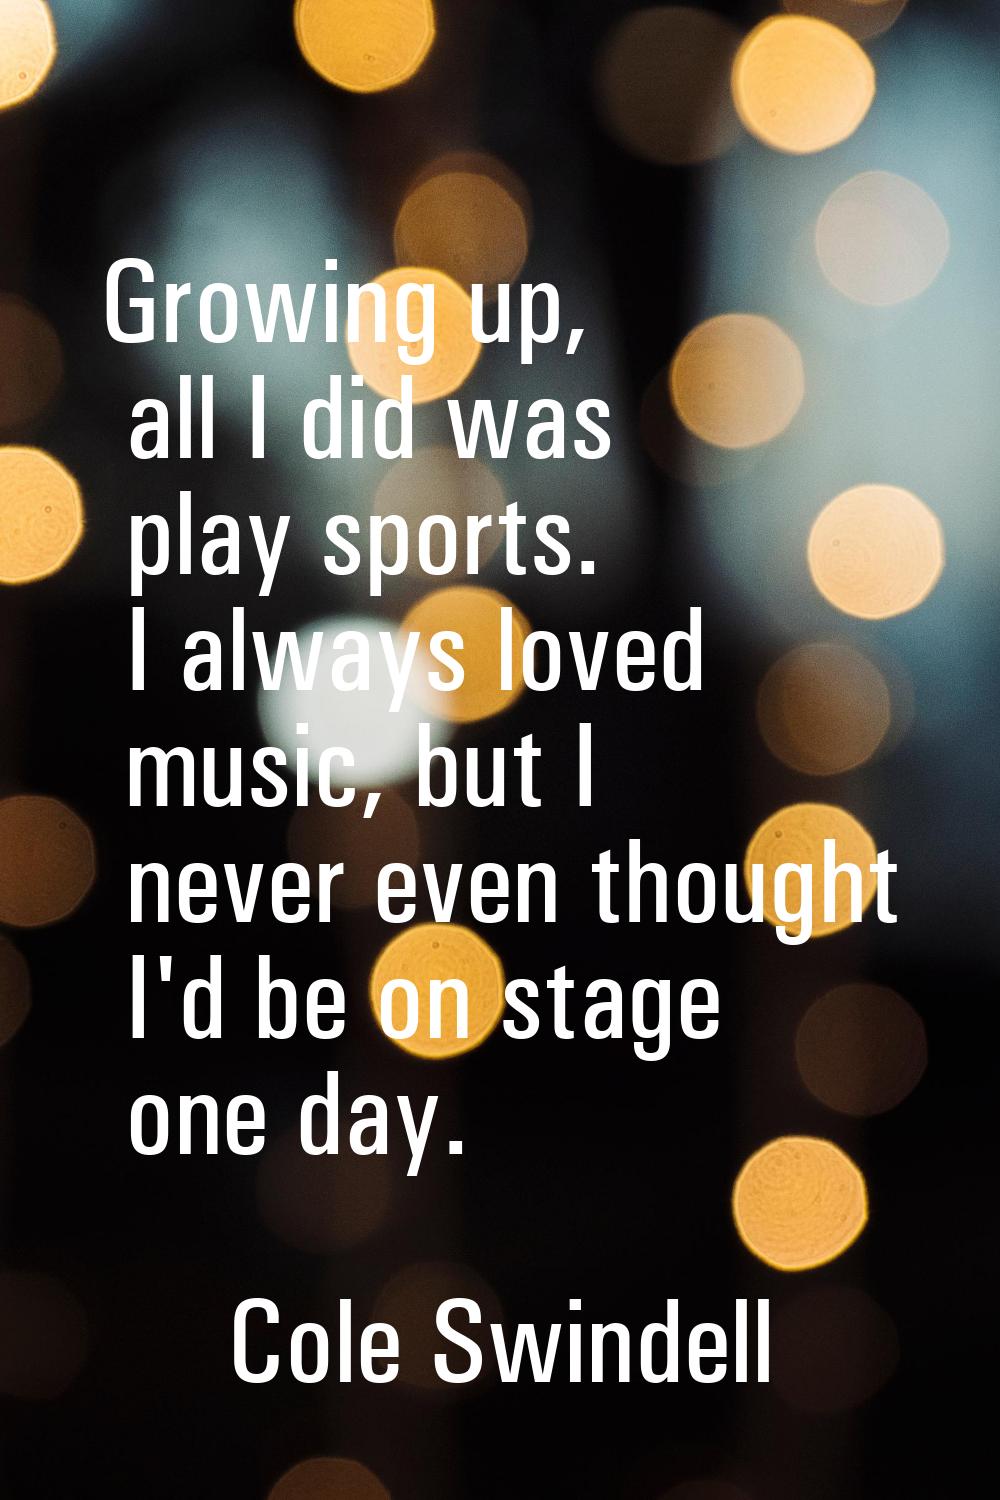 Growing up, all I did was play sports. I always loved music, but I never even thought I'd be on sta